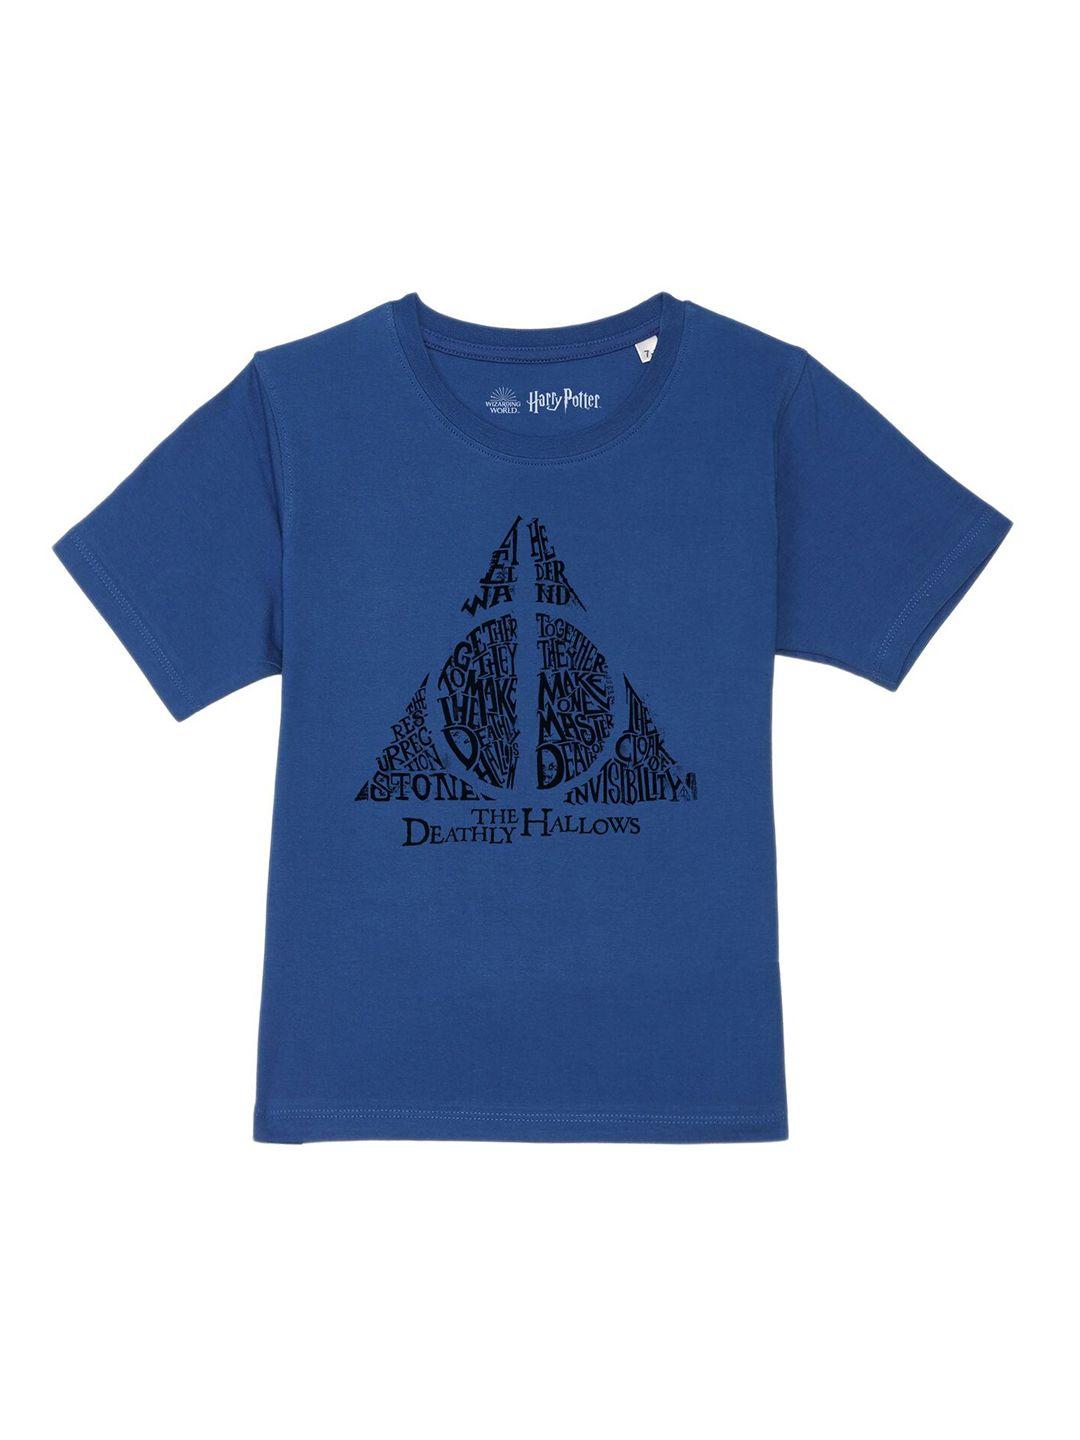 harry-potter-by-wear-your-mind-boys-blue-printed-pure-cotton-t-shirt